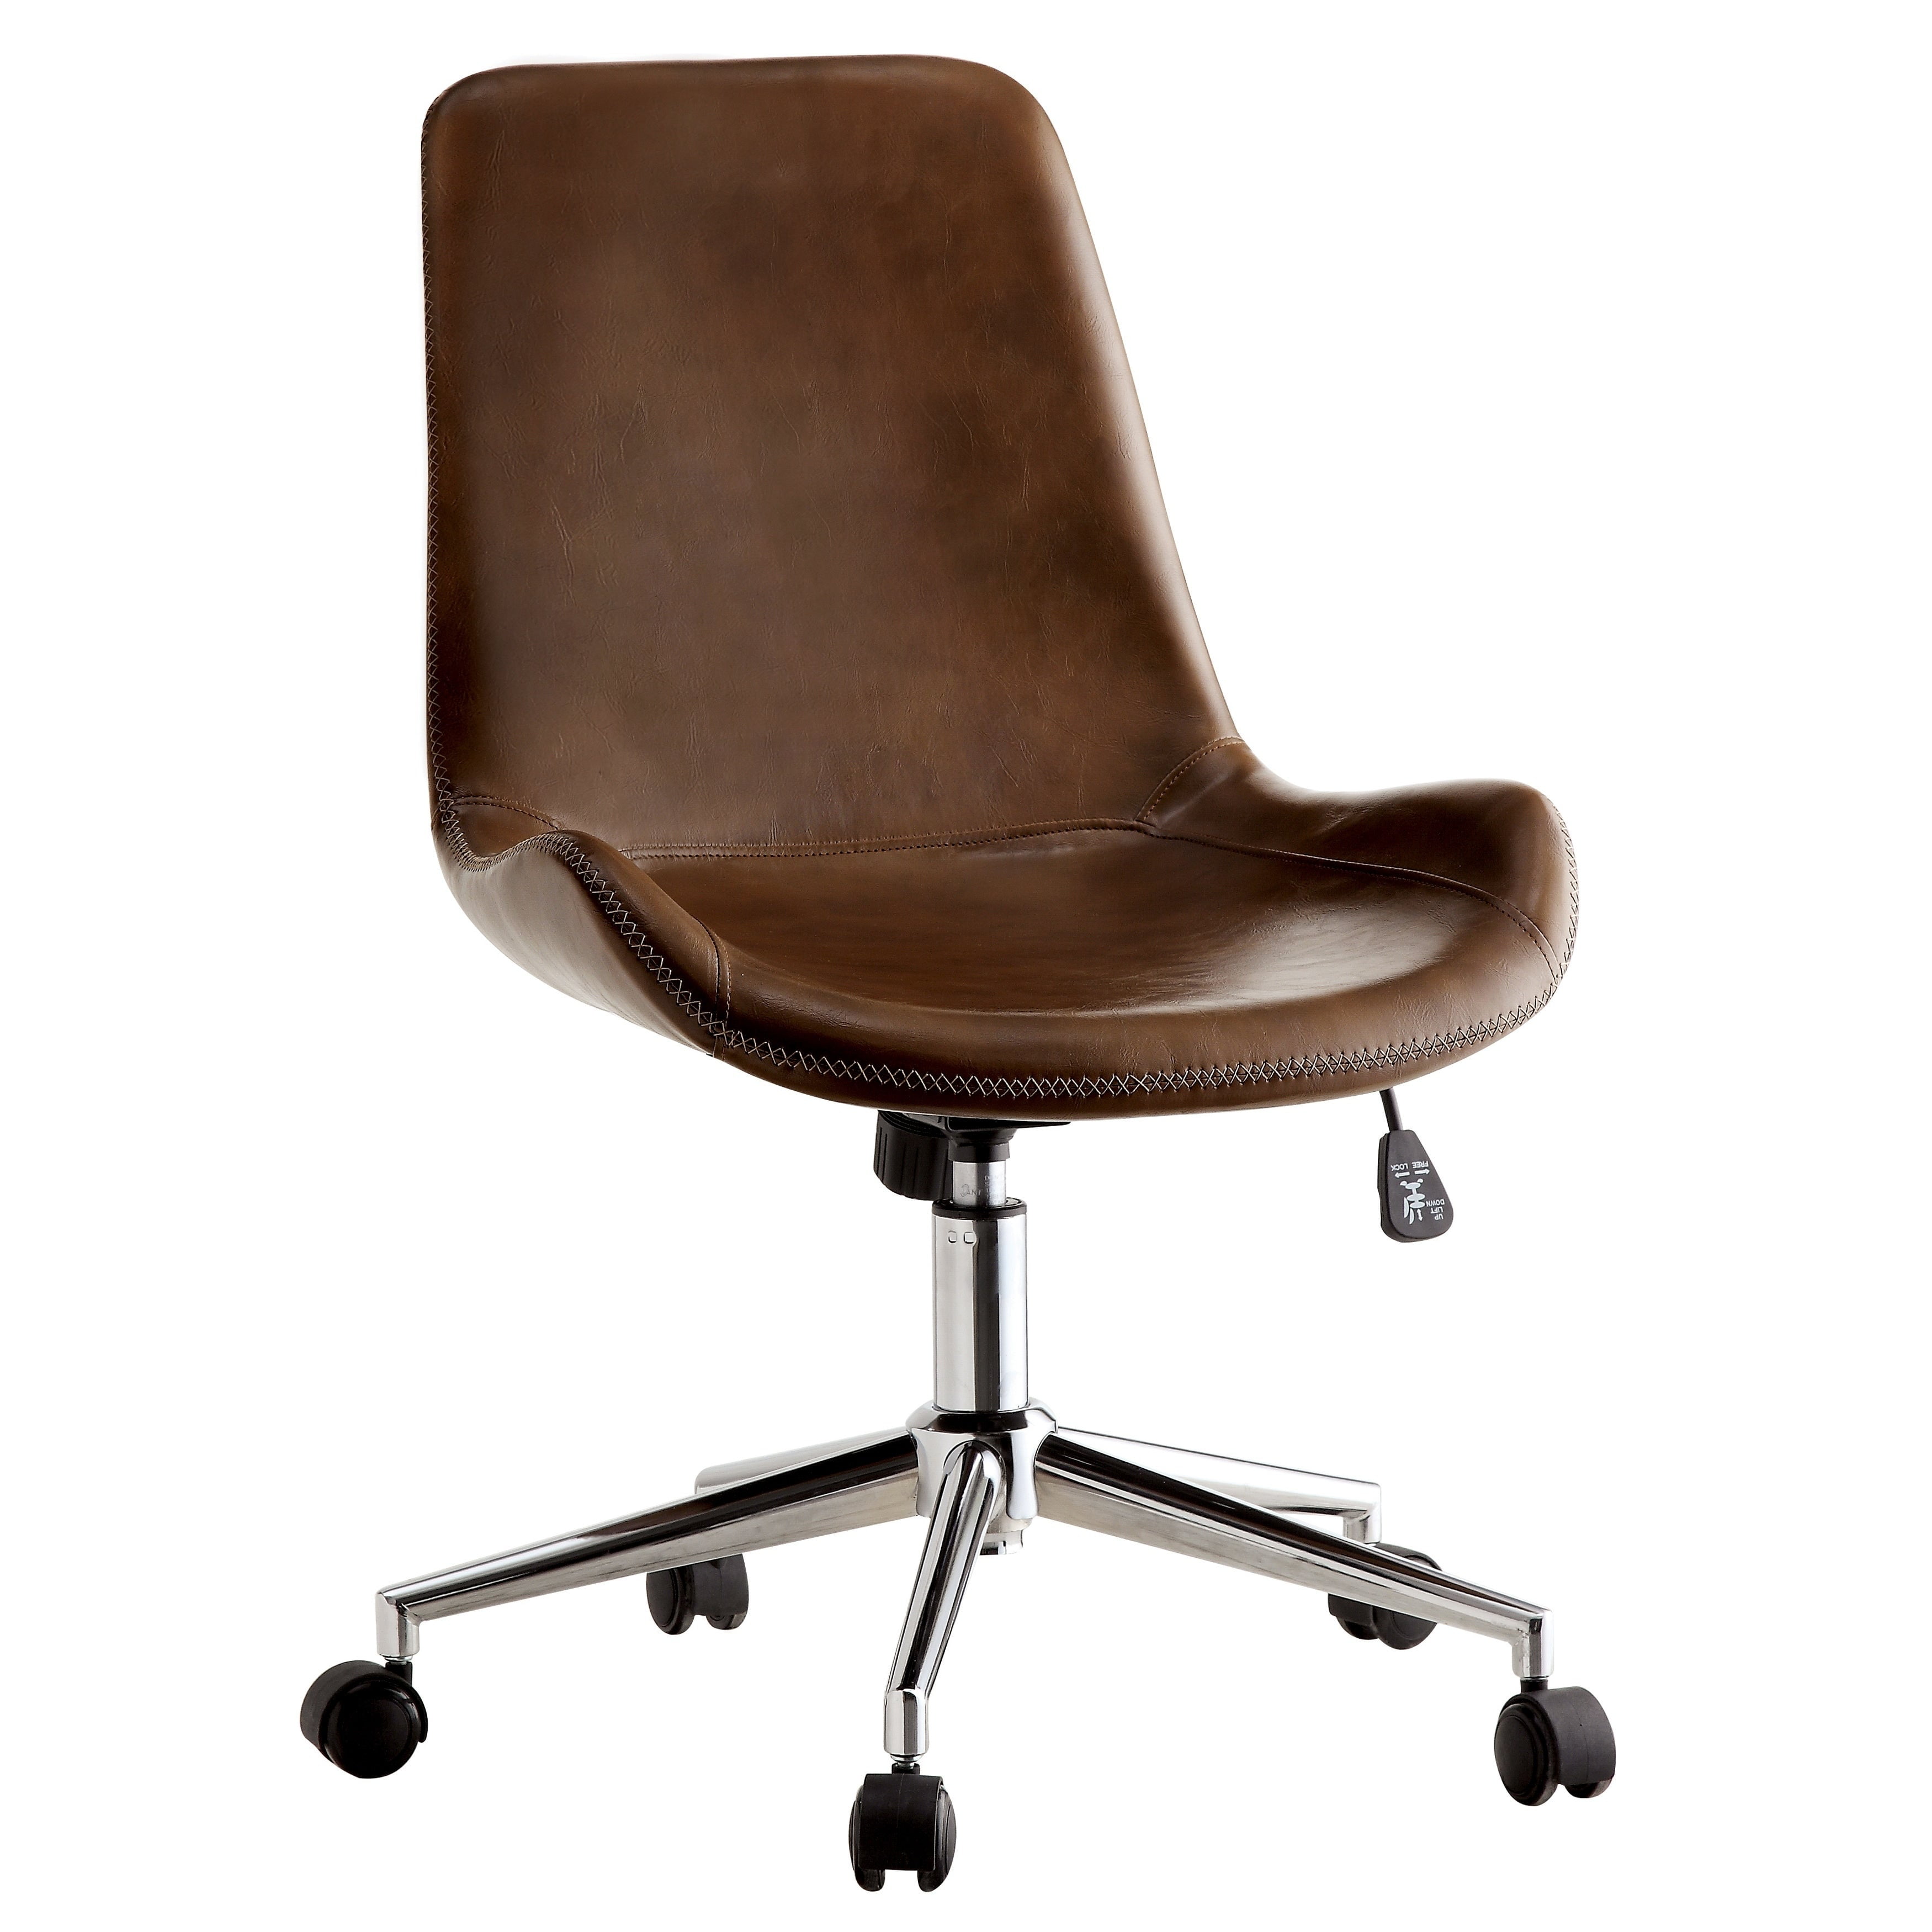 Leatherette Bucket Seat Office Chair with Adjustable Height, Brown and